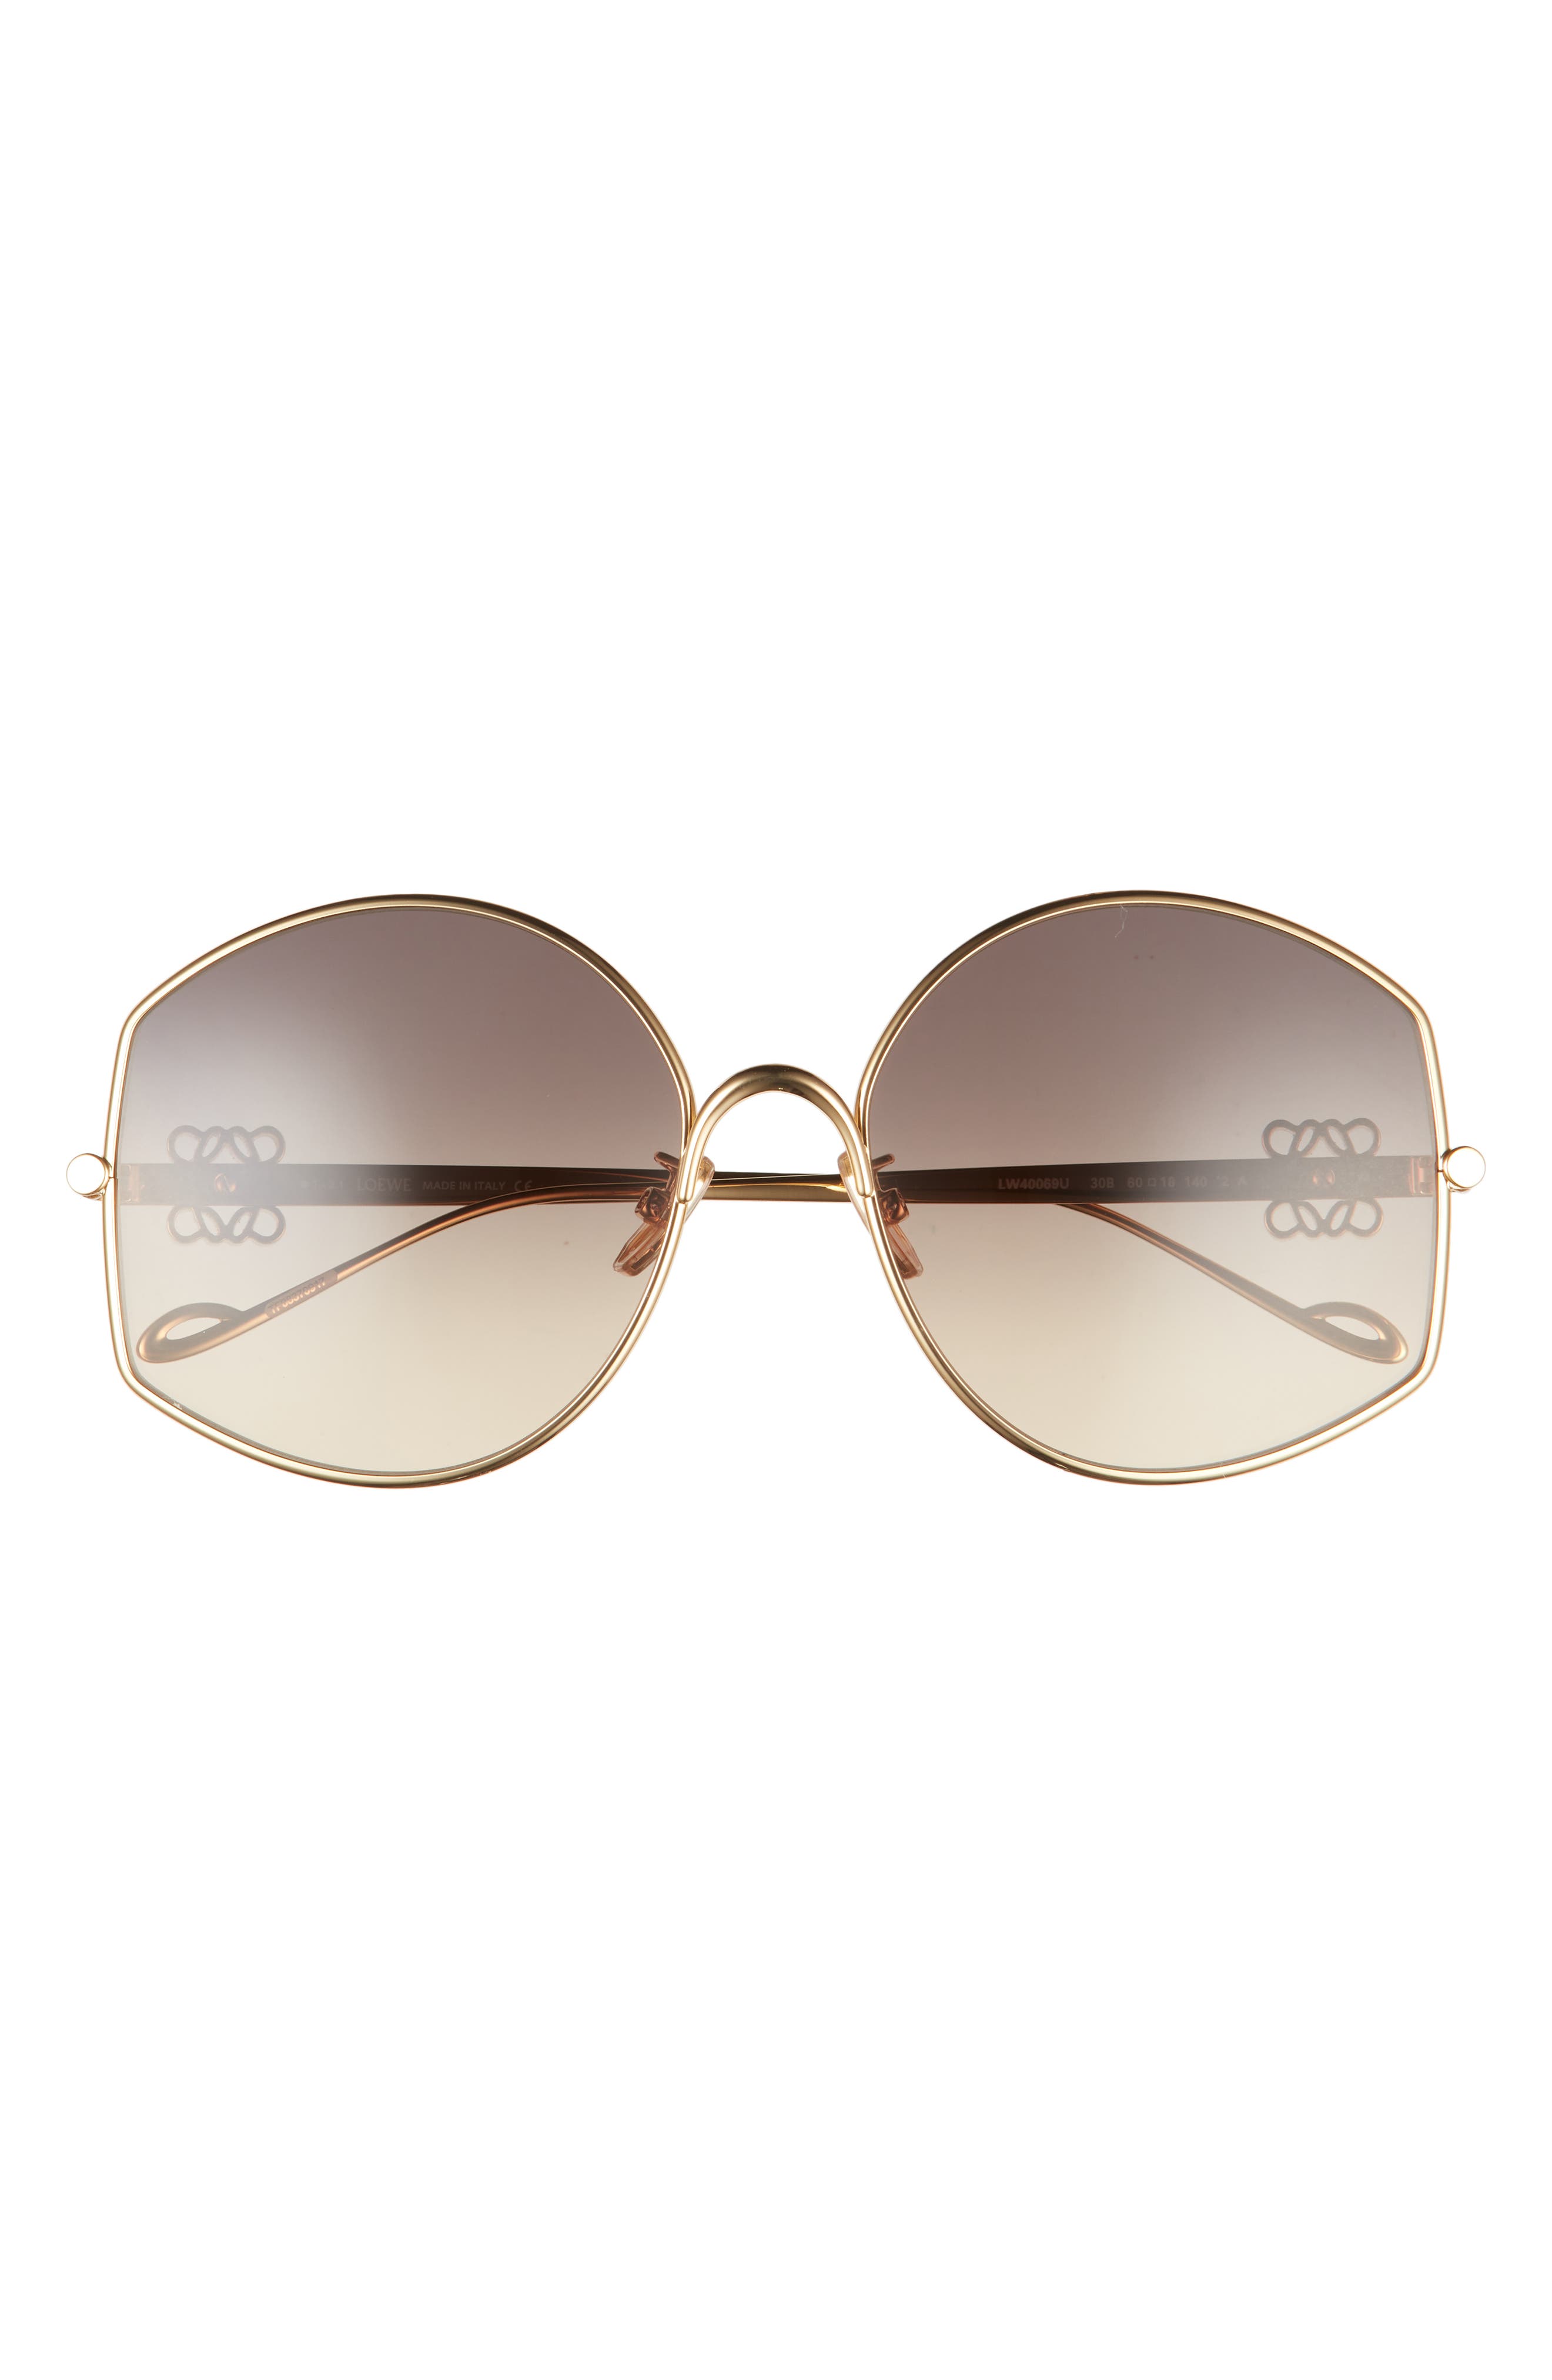 Loewe 60mm Round Sunglasses in Shiny Gold /Gradient Smoke at Nordstrom